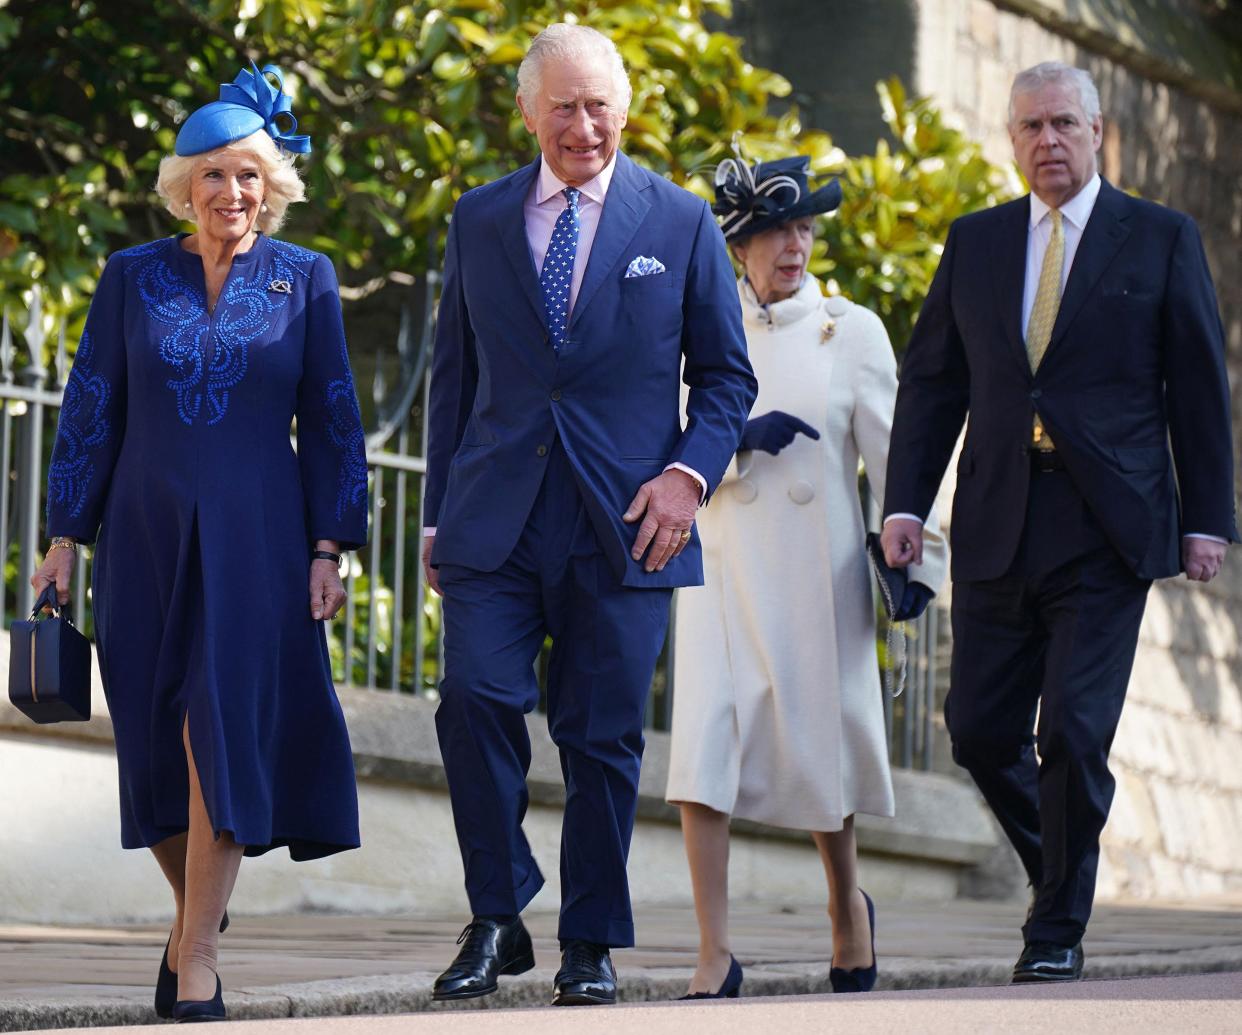 Britain's King Charles III and Camilla, queen consort, walk with Princess Anne and Prince Andrew, duke of York as they arrive for the Easter service at St. George's Chapel, Windsor Castle on April 9.